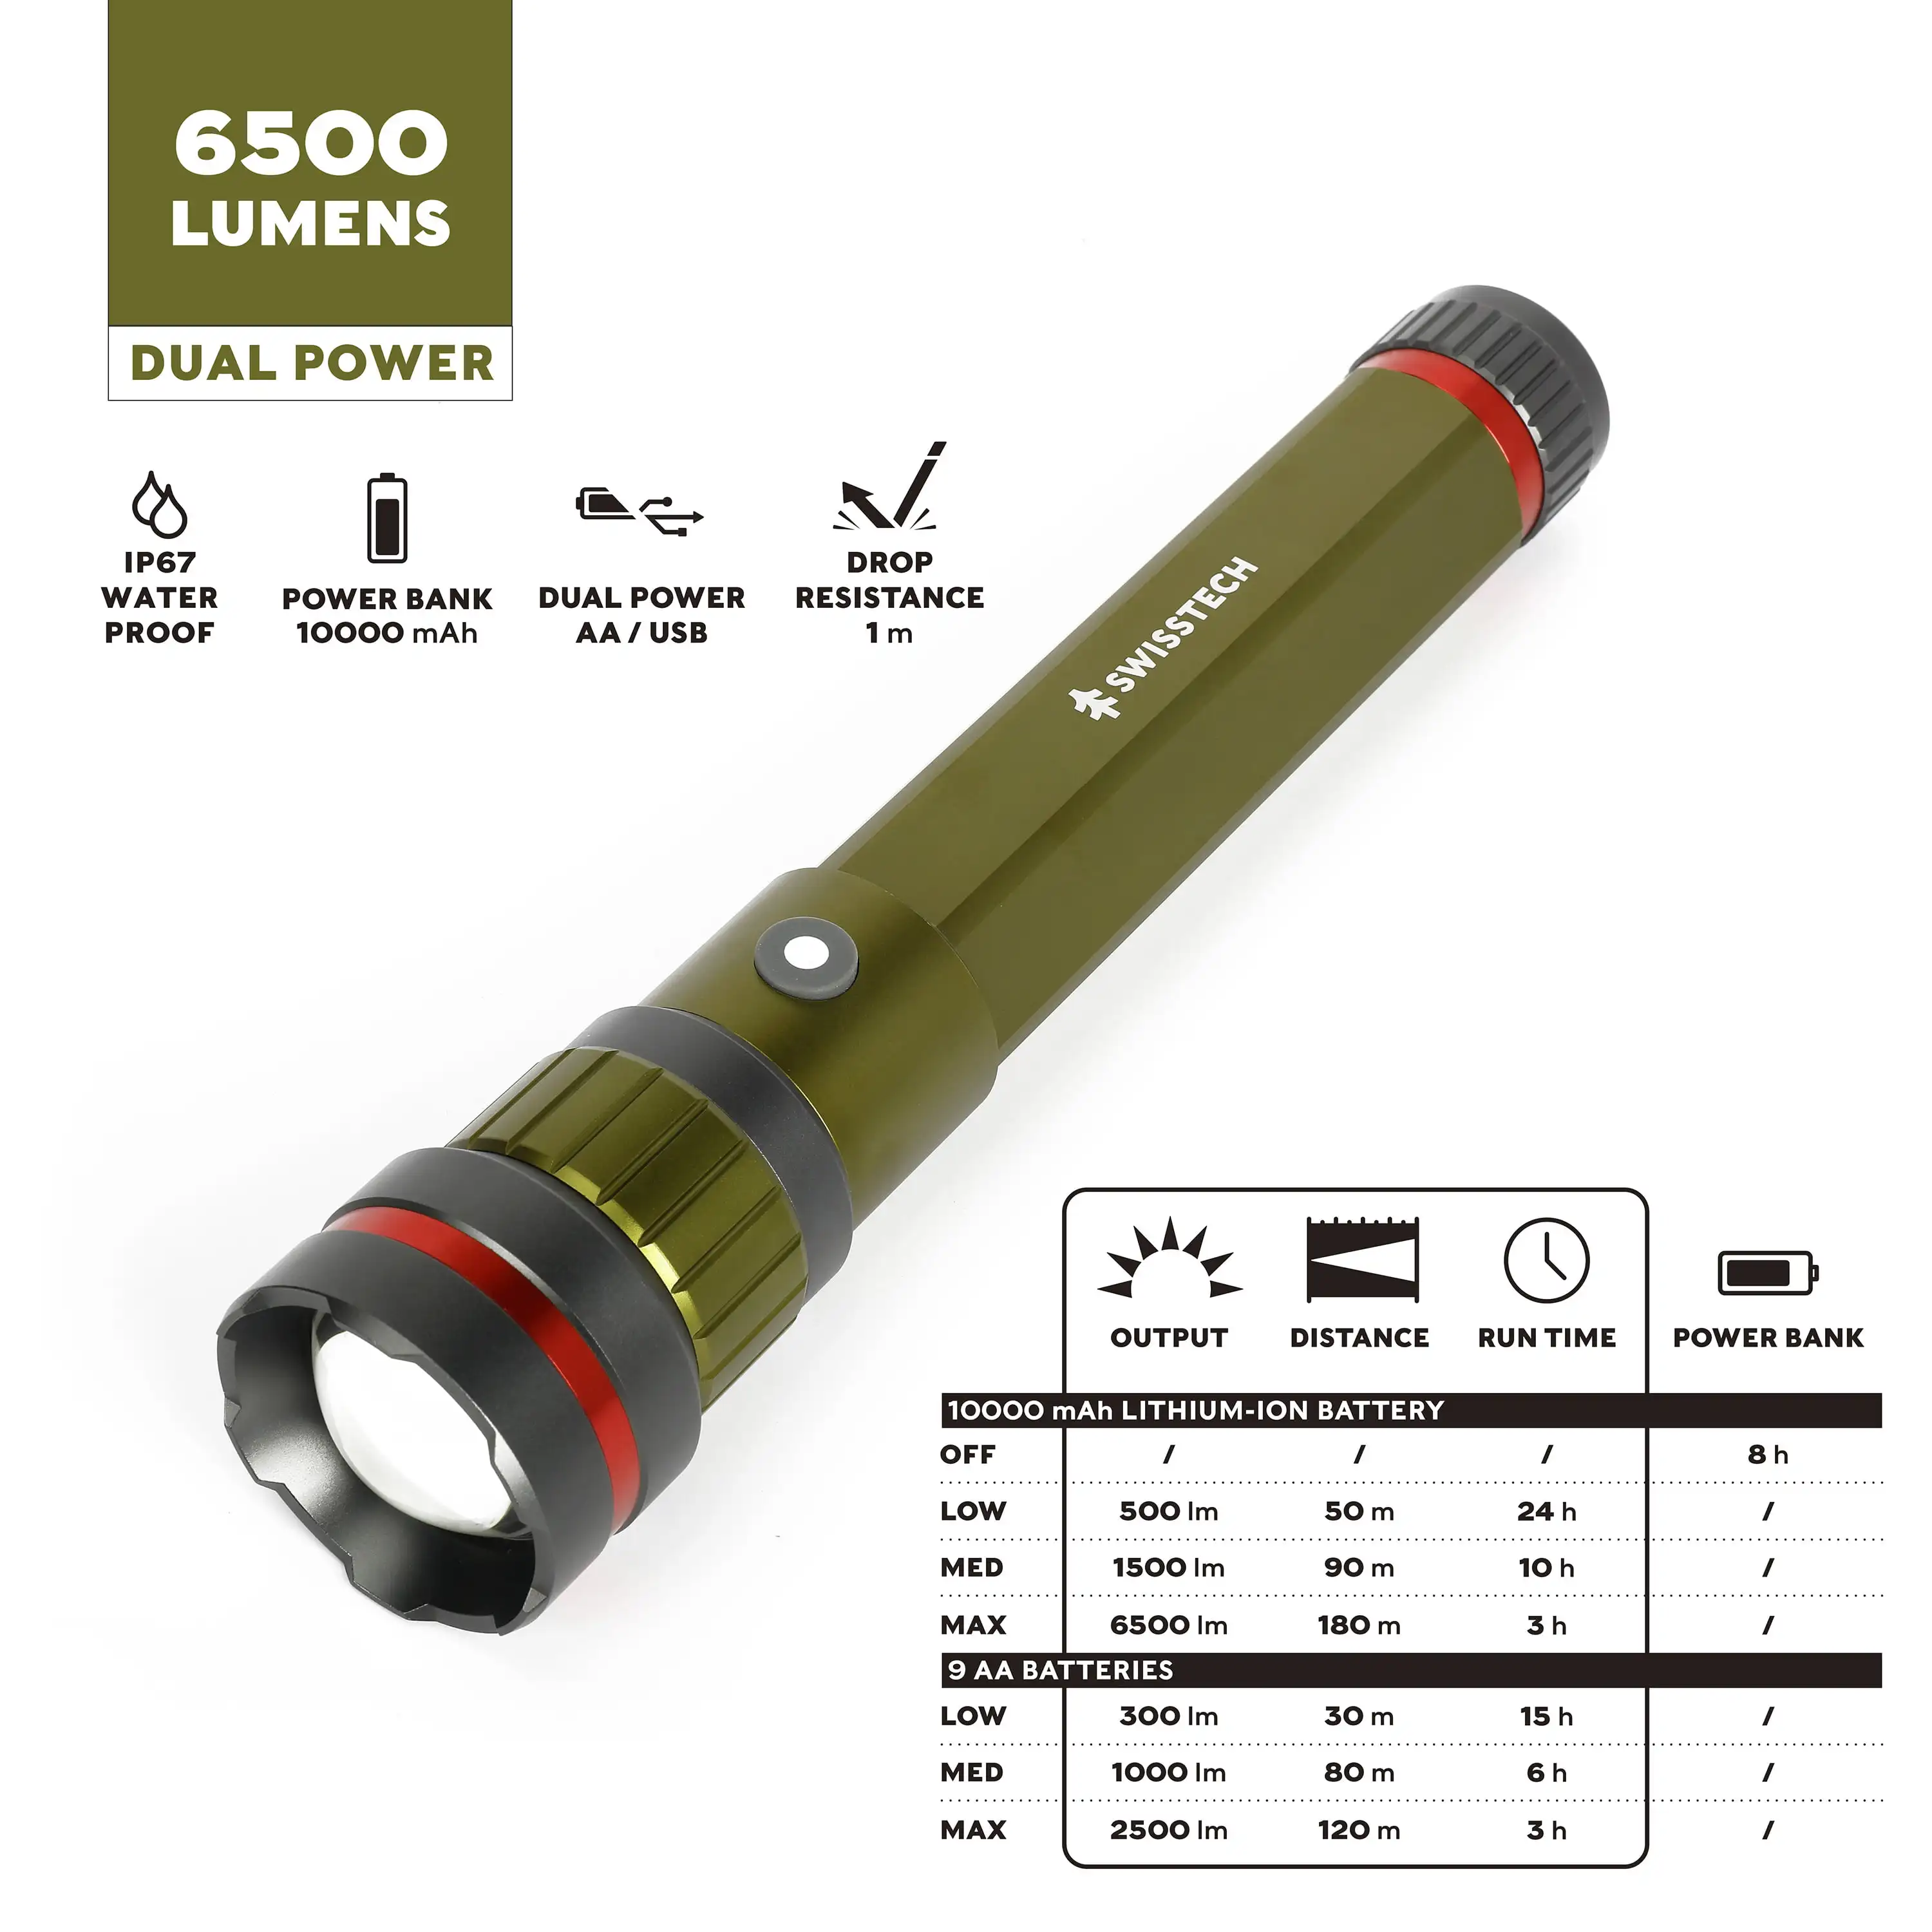 6500 Lumen LED Flashlight Rechargeable Dual Power AA/USB with Charging Bank, IP67 Waterproof, Drop Resistant